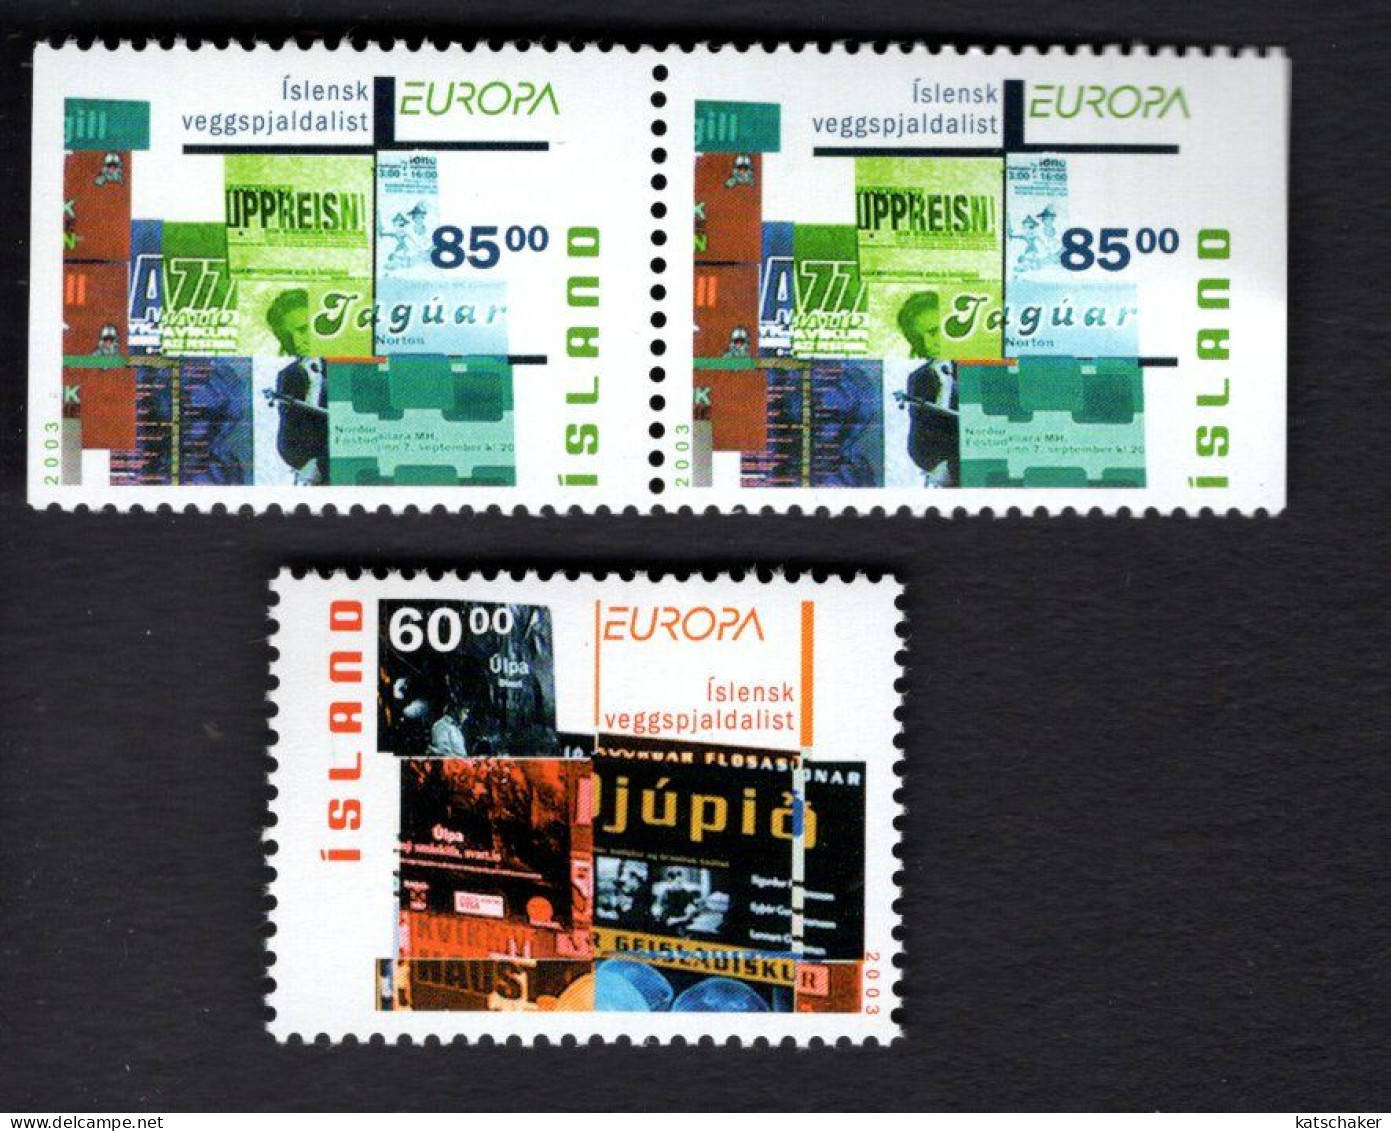 2022488354 2003 SCOTT 993 994 (XX)  POSTFRIS MINT NEVER HINGED - EUROPA ISSUE - POSTER ART - Unused Stamps